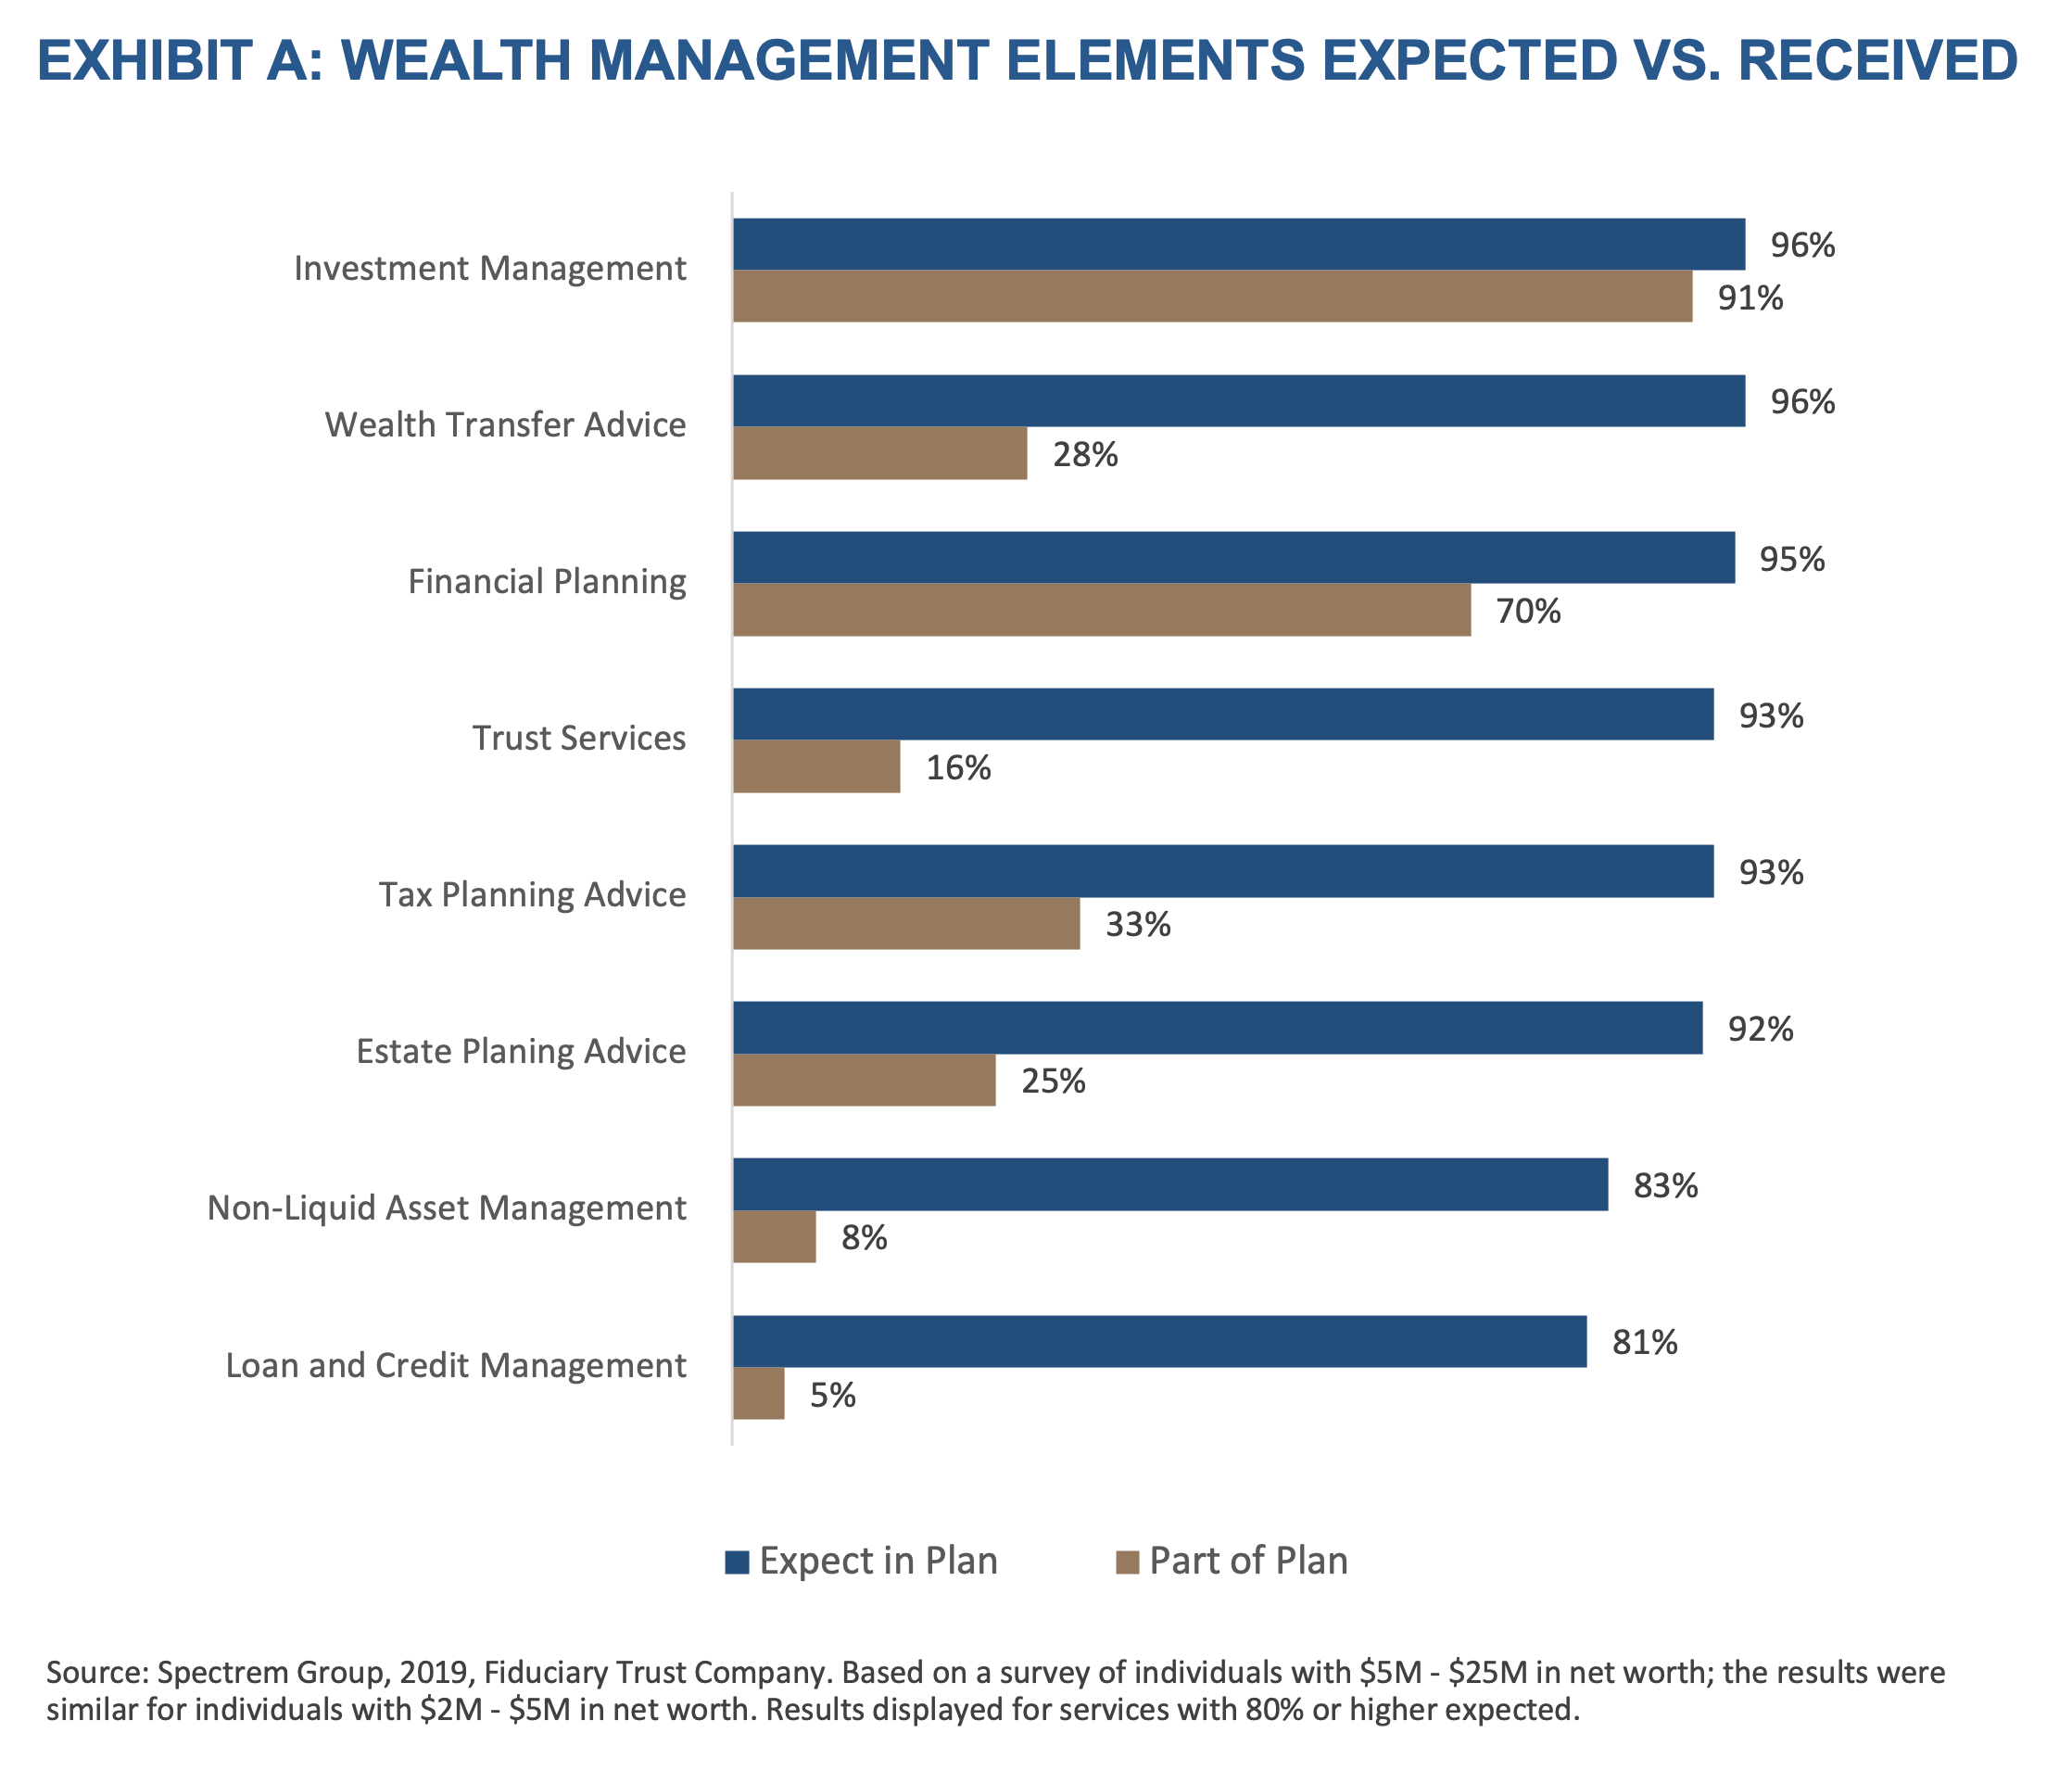 Exhibit A-Wealth Management Elements Expected vs Received